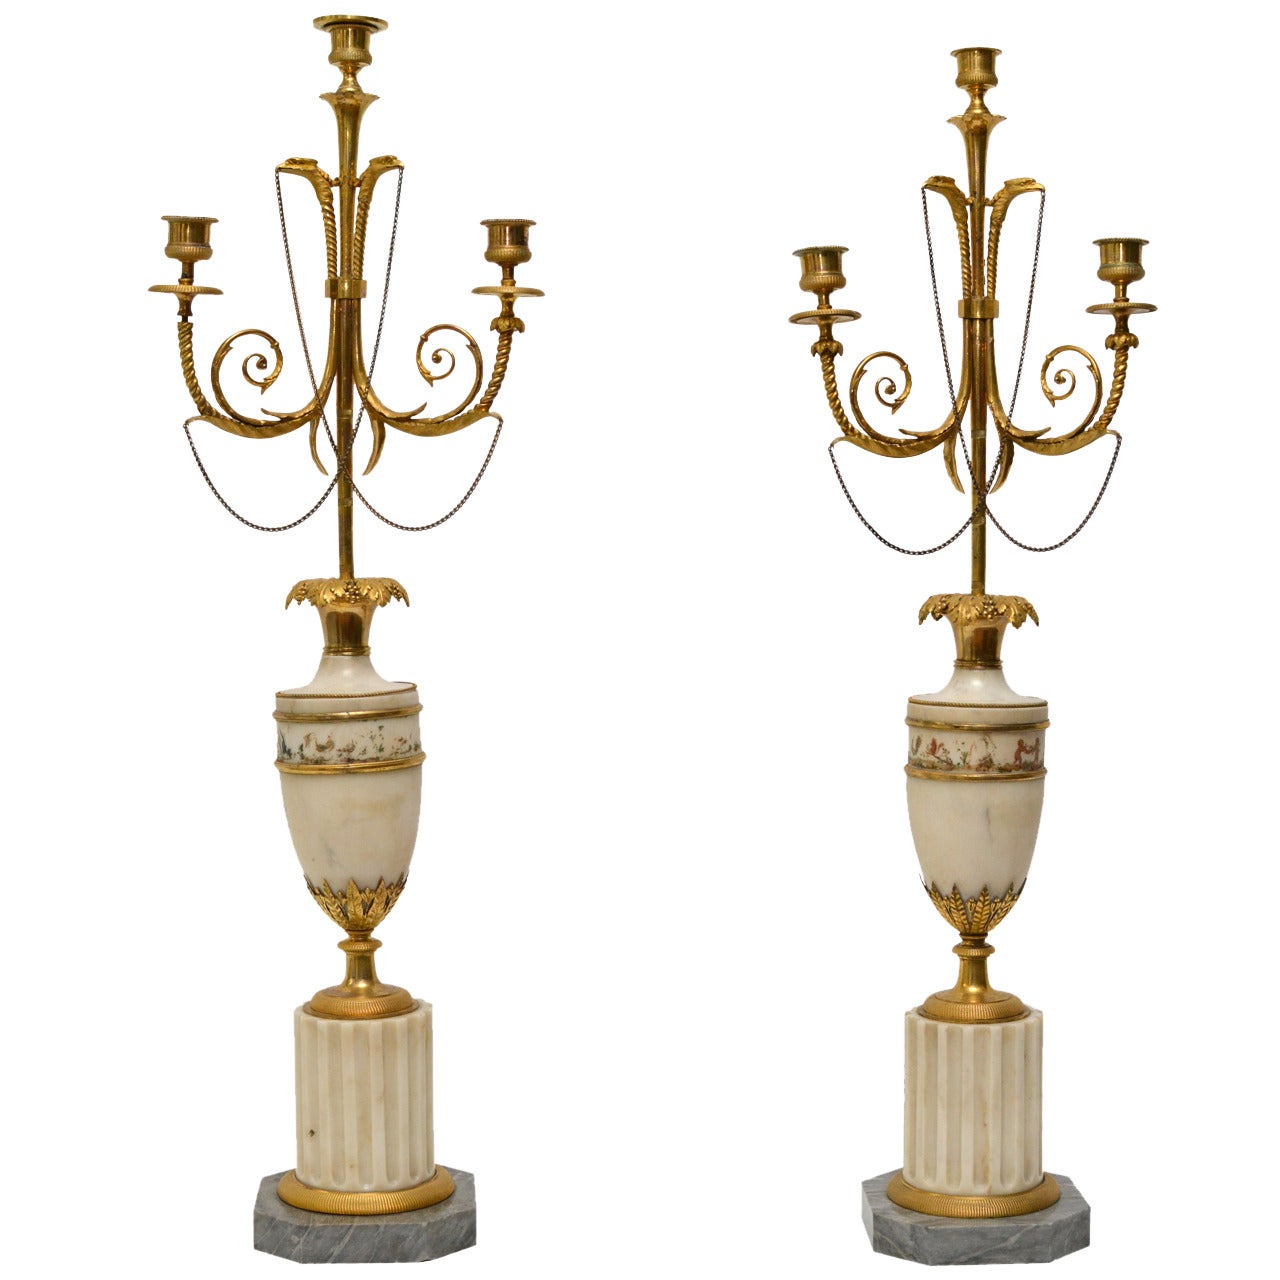 Pair of Directoire Gilt Bronze and Marble Candelabra, circa 1800